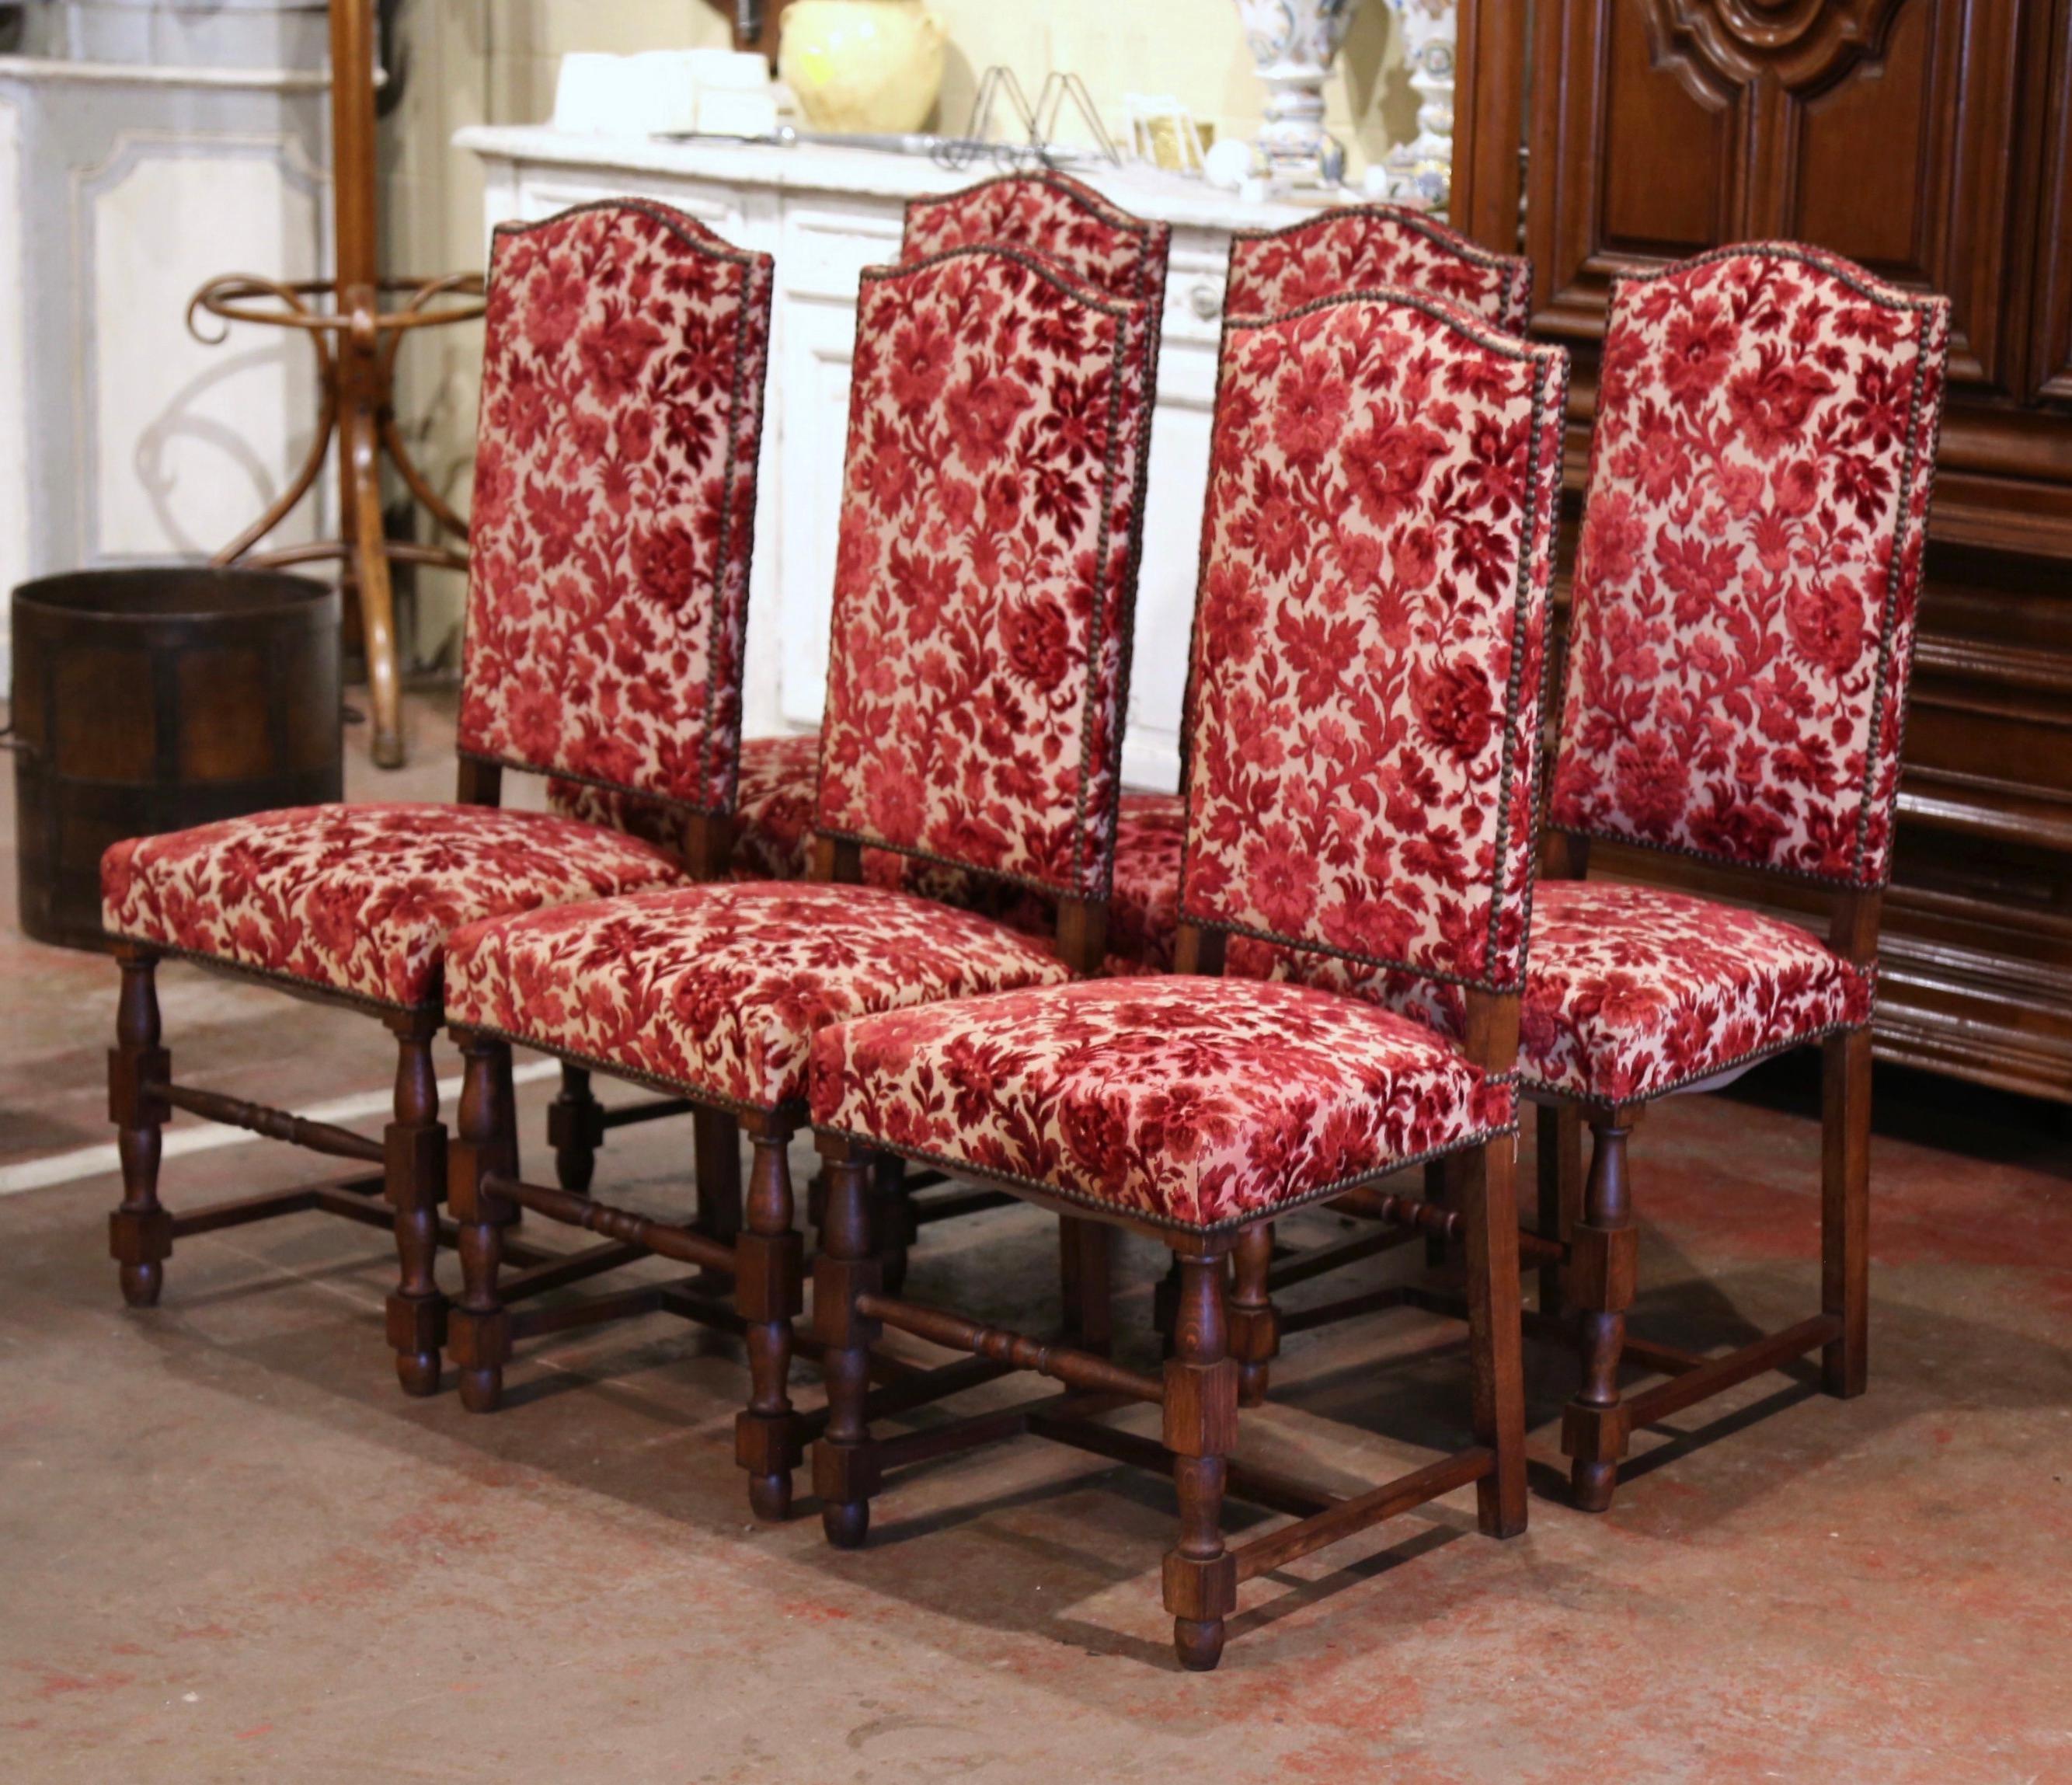 Place this elegant suite of six side chairs around your breakfast table for a true country French look. Crafted circa 1920 in the Louis XIII style, each chair stands on turned legs ending with bottom stretcher; the chair has a tall arched back and a